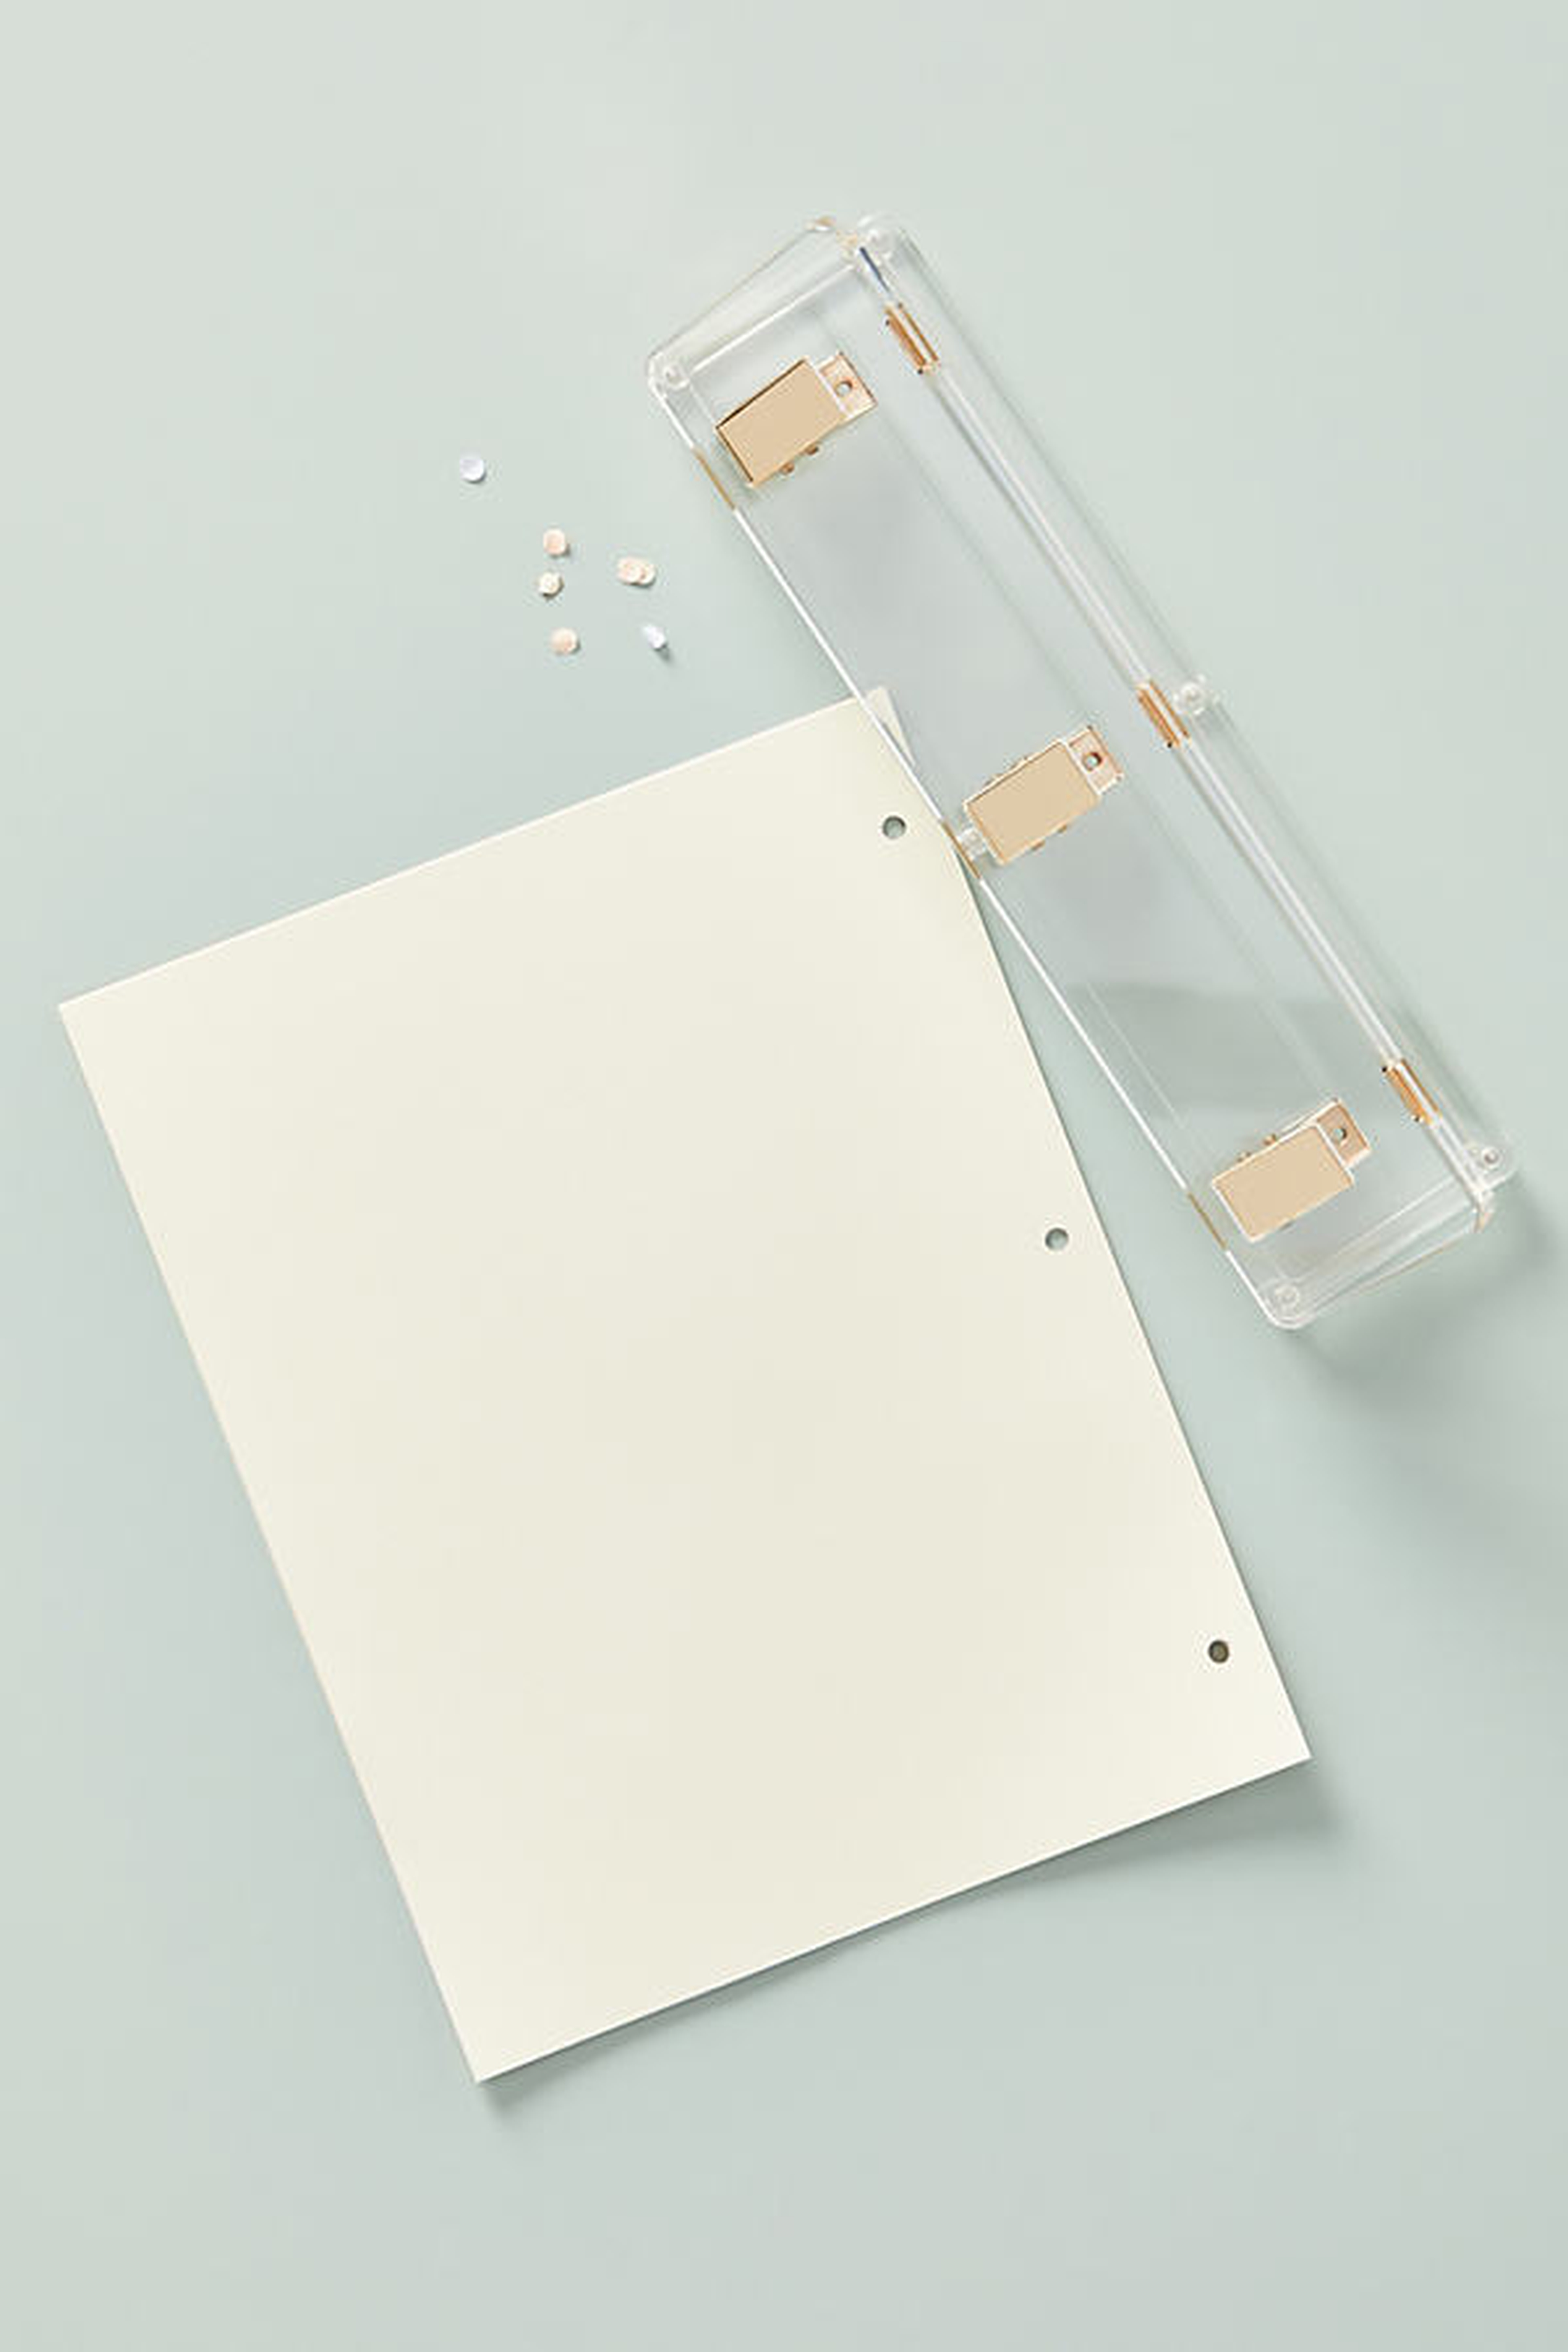 Acrylic Three-Hole Punch By Russell+Hazel in Clear - Anthropologie